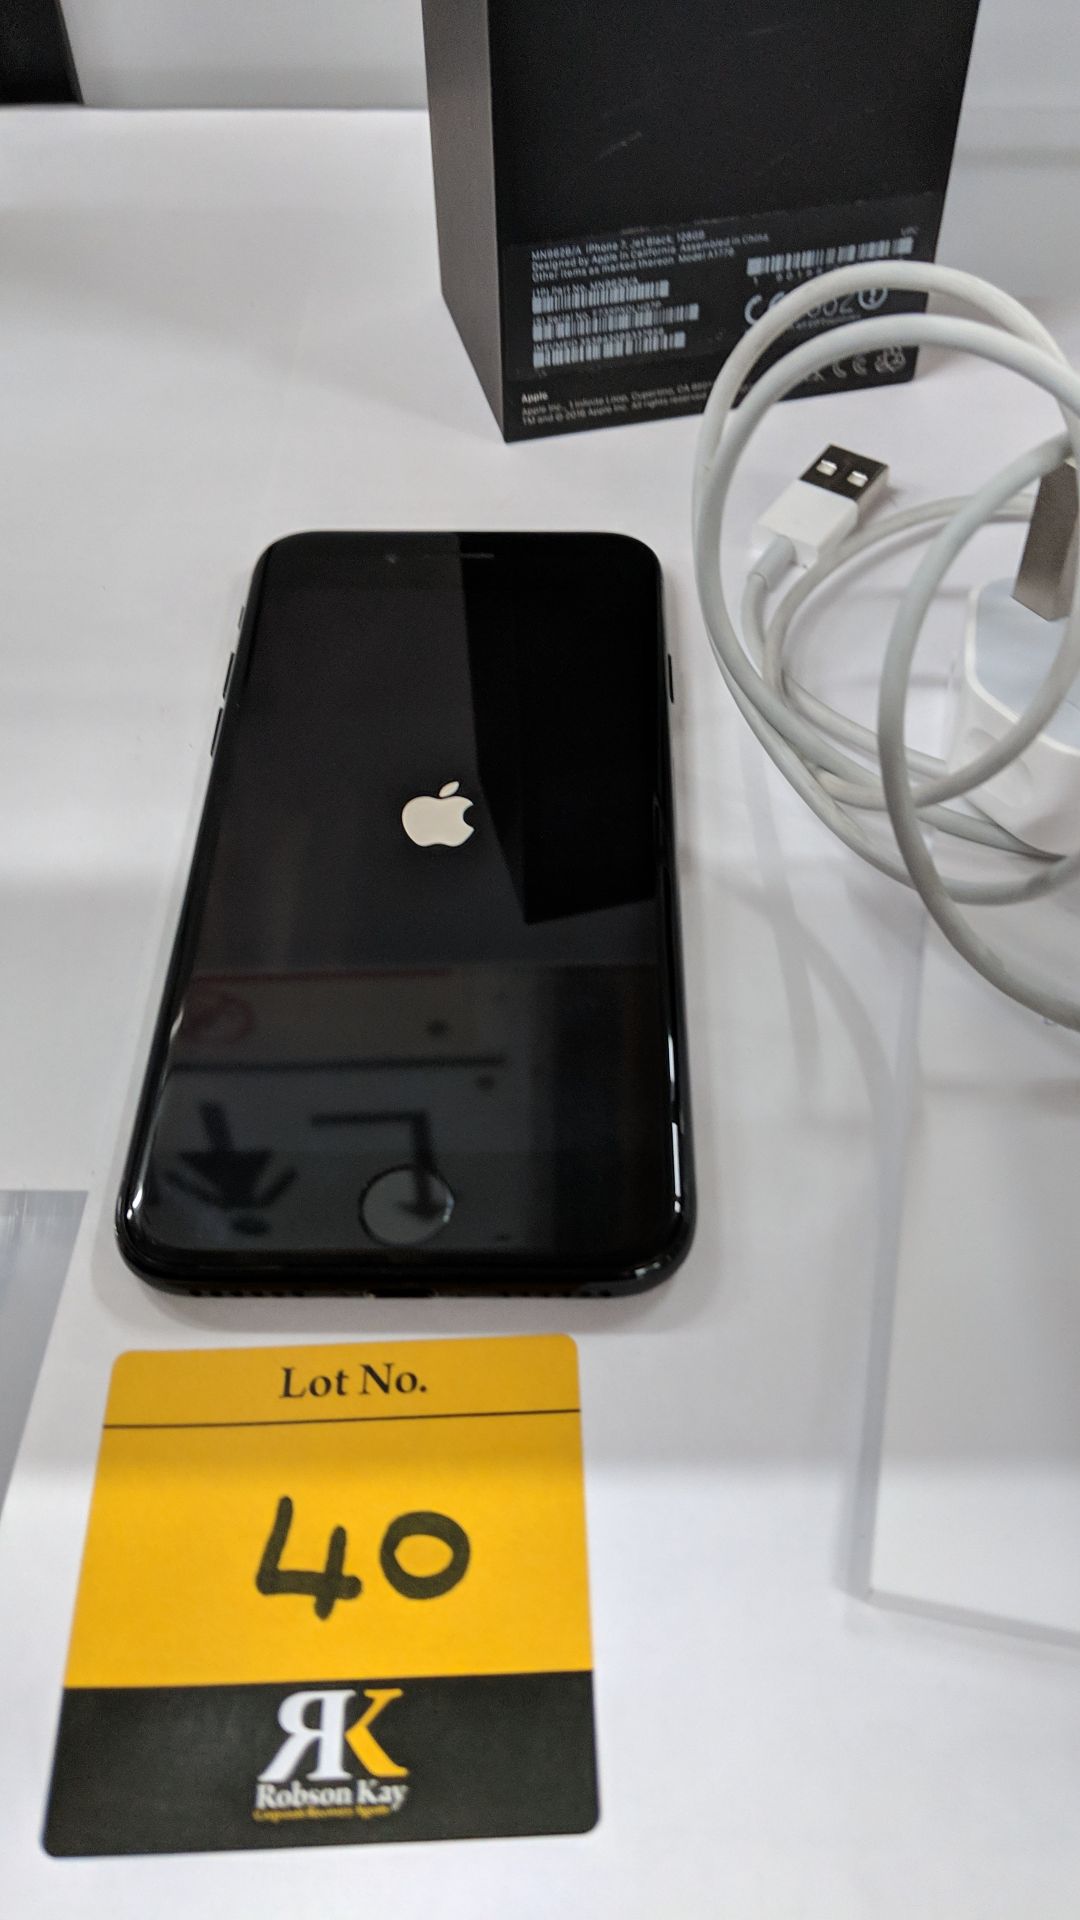 Apple iPhone 7, Jet Black, 128Gb, model A1778 with charger, earphones, box and non-Apple - Image 9 of 18